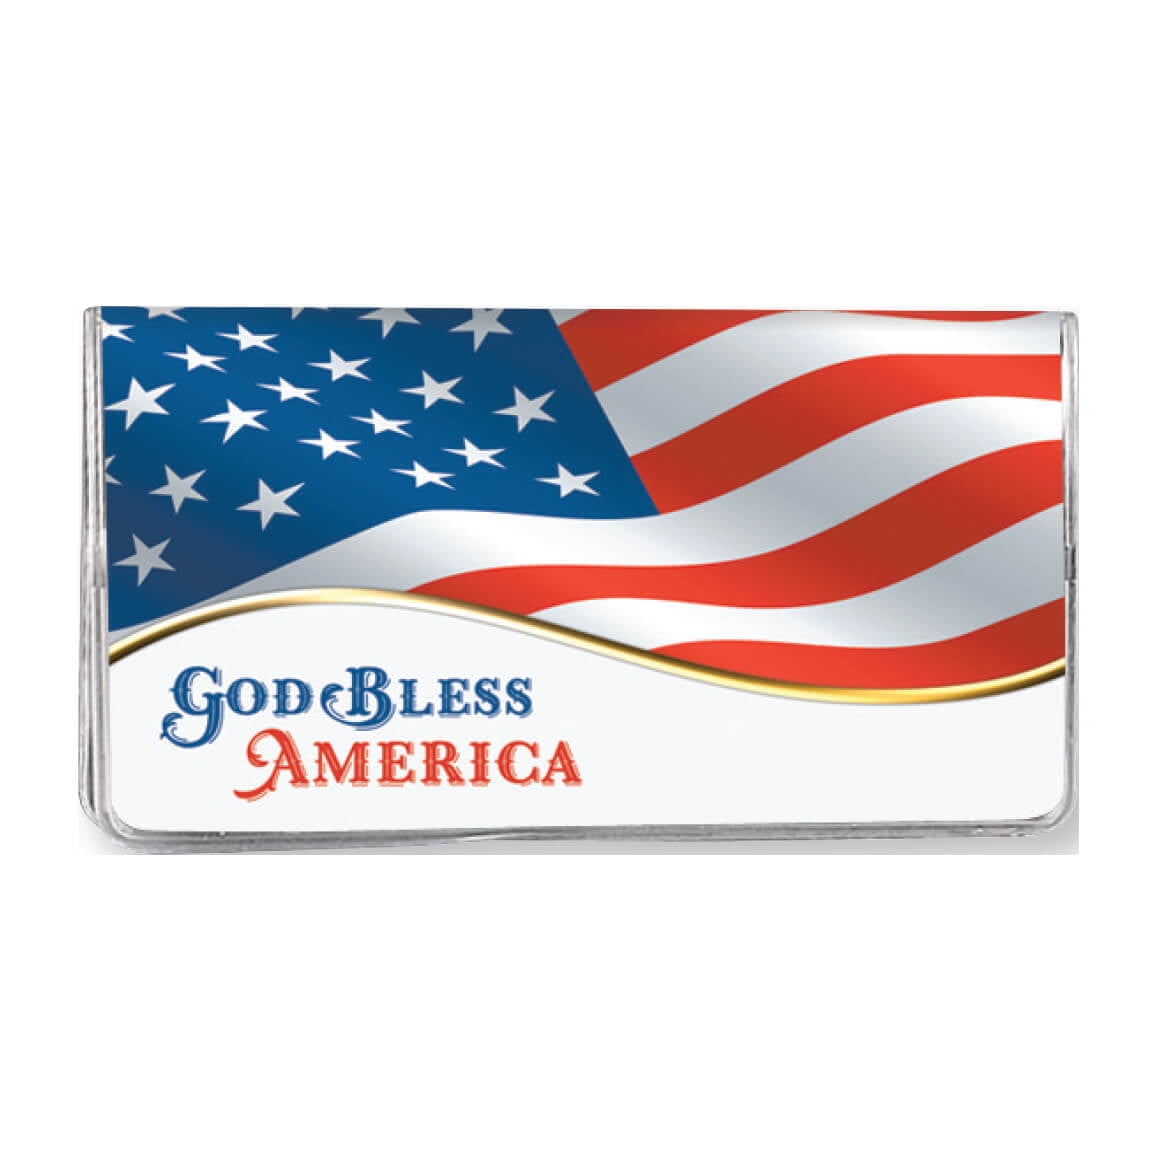 2 Yr Planner God Bless America Flag, 2023-2024 - Pocket Sized Calendar  Ideal For Purses, Briefcases, Or Backpacks – 6 ¾ Inches X 3 5/8 Inches -  Walmart.com